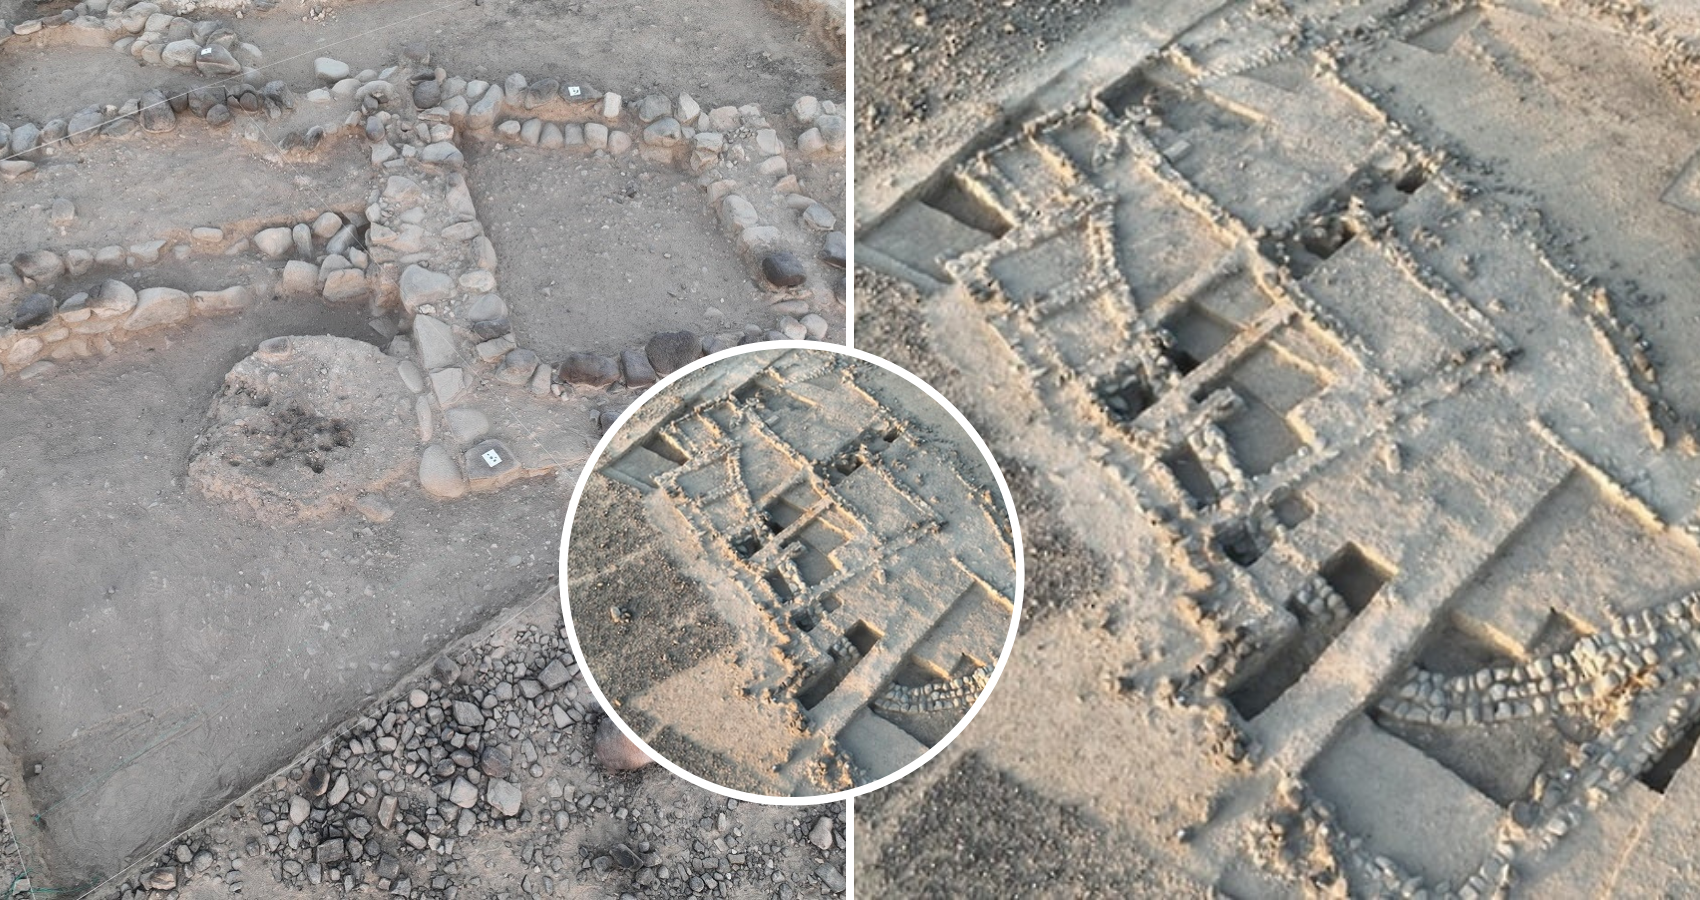 5,000-year-old Settlement Unearthed in Al Mudhaibi, Oman